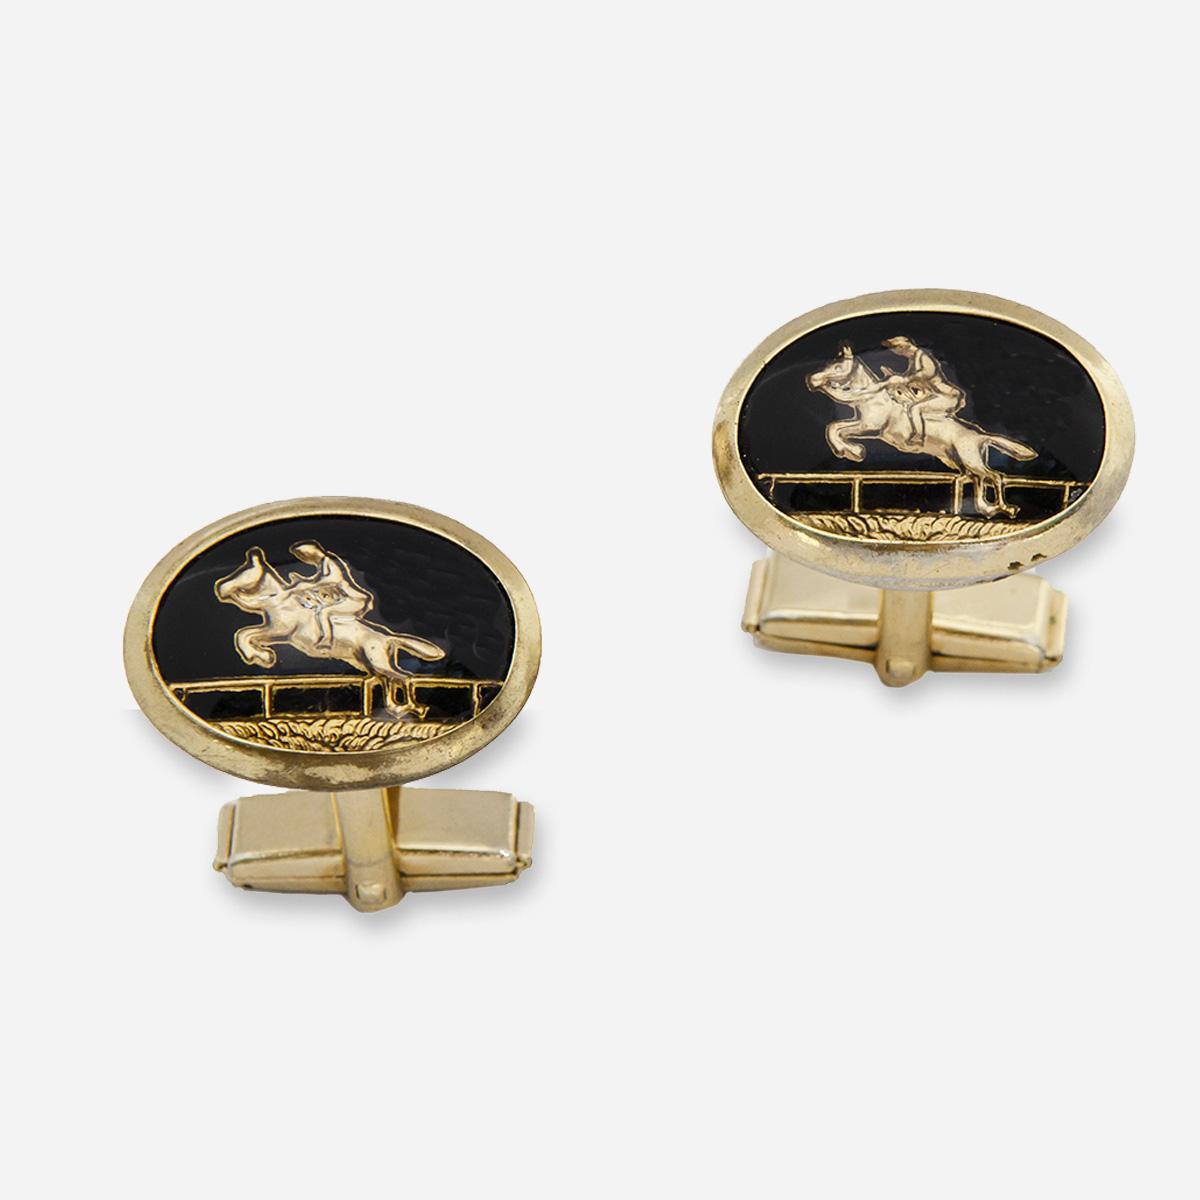 vintage cufflinks with horses